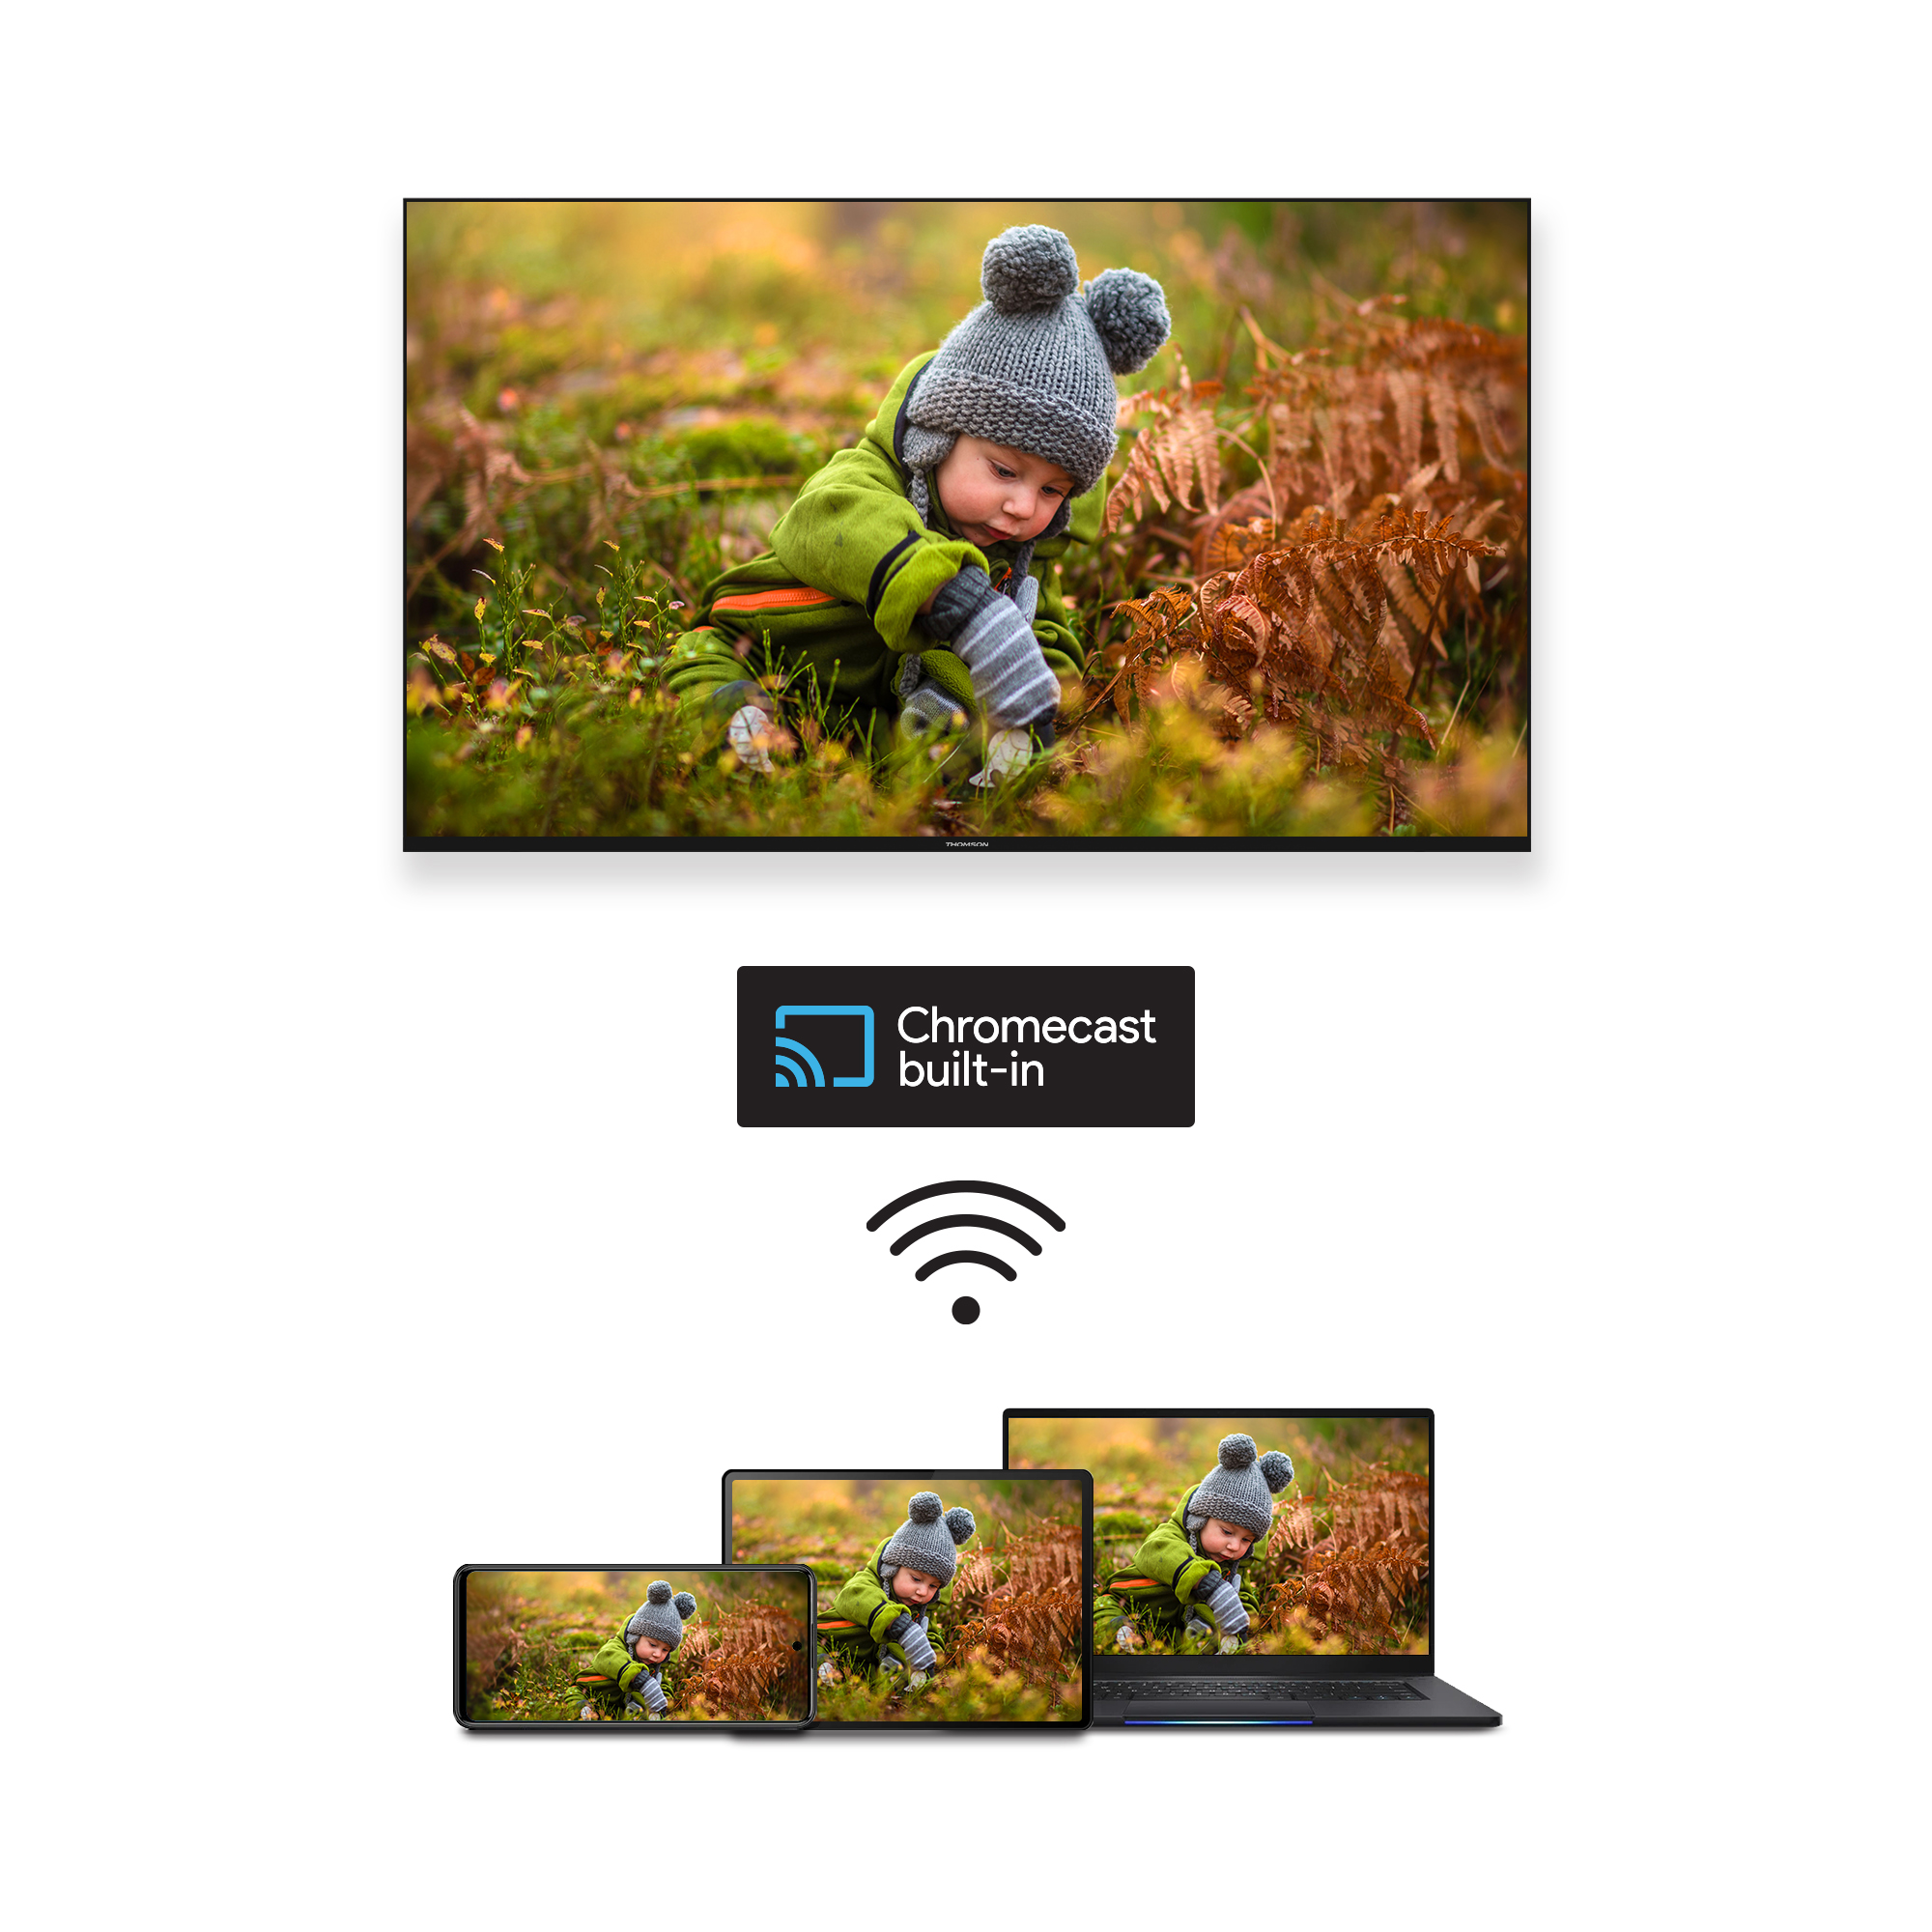 Thomson 40" FHD Smart TV on Android | 40FA2S13